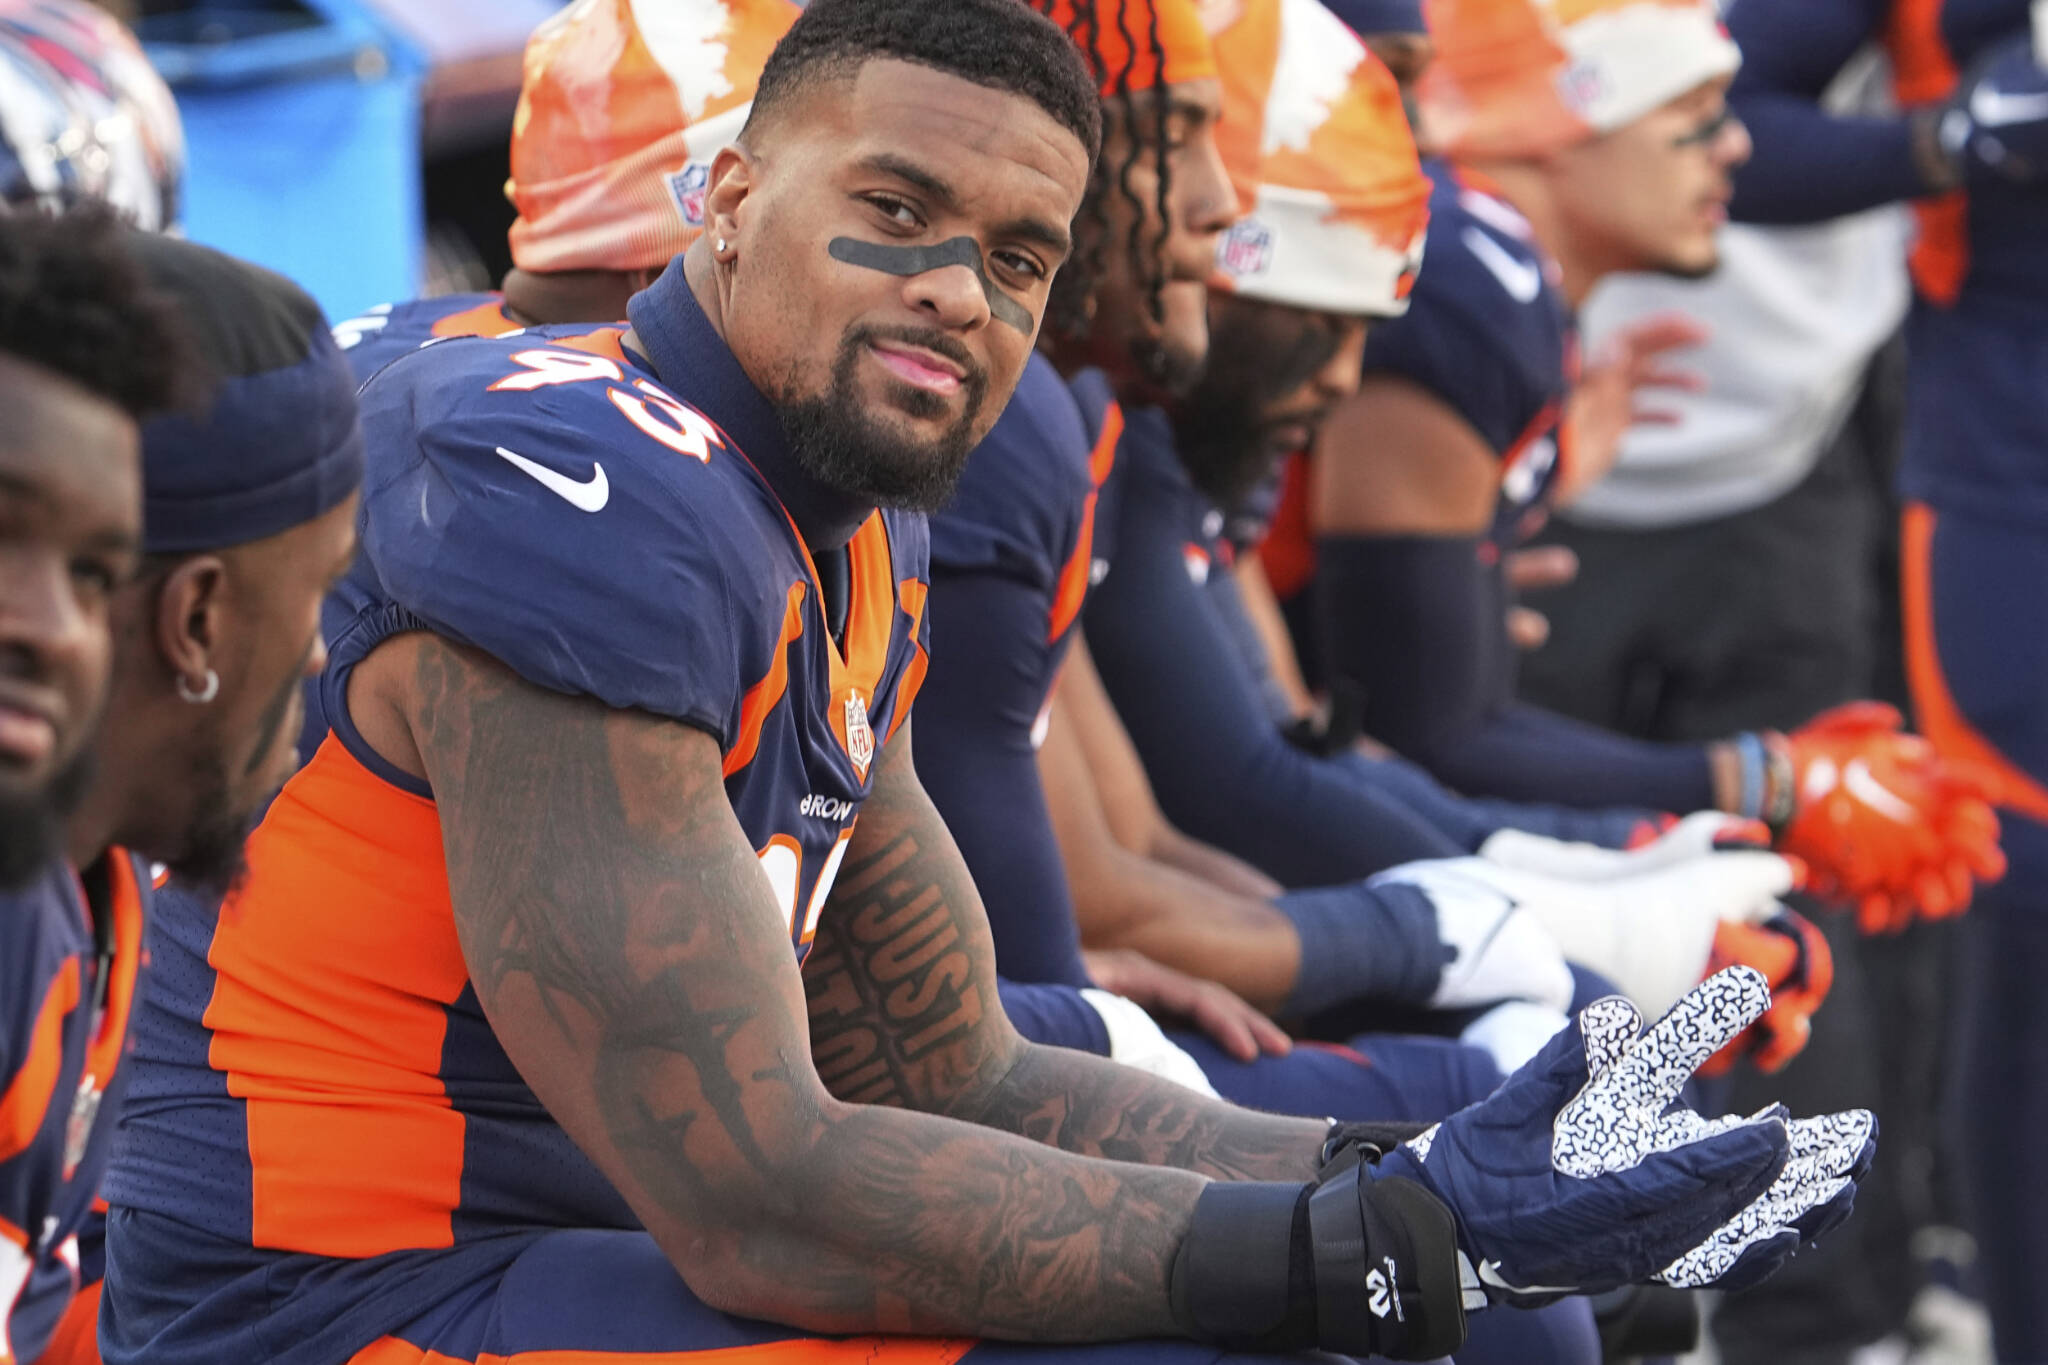 Broncos defensive lineman Dre’Mont Jones rests on the bench during a game against the Chiefs on December 11, 2022, in Denver. (AP Photo/Bart Young)